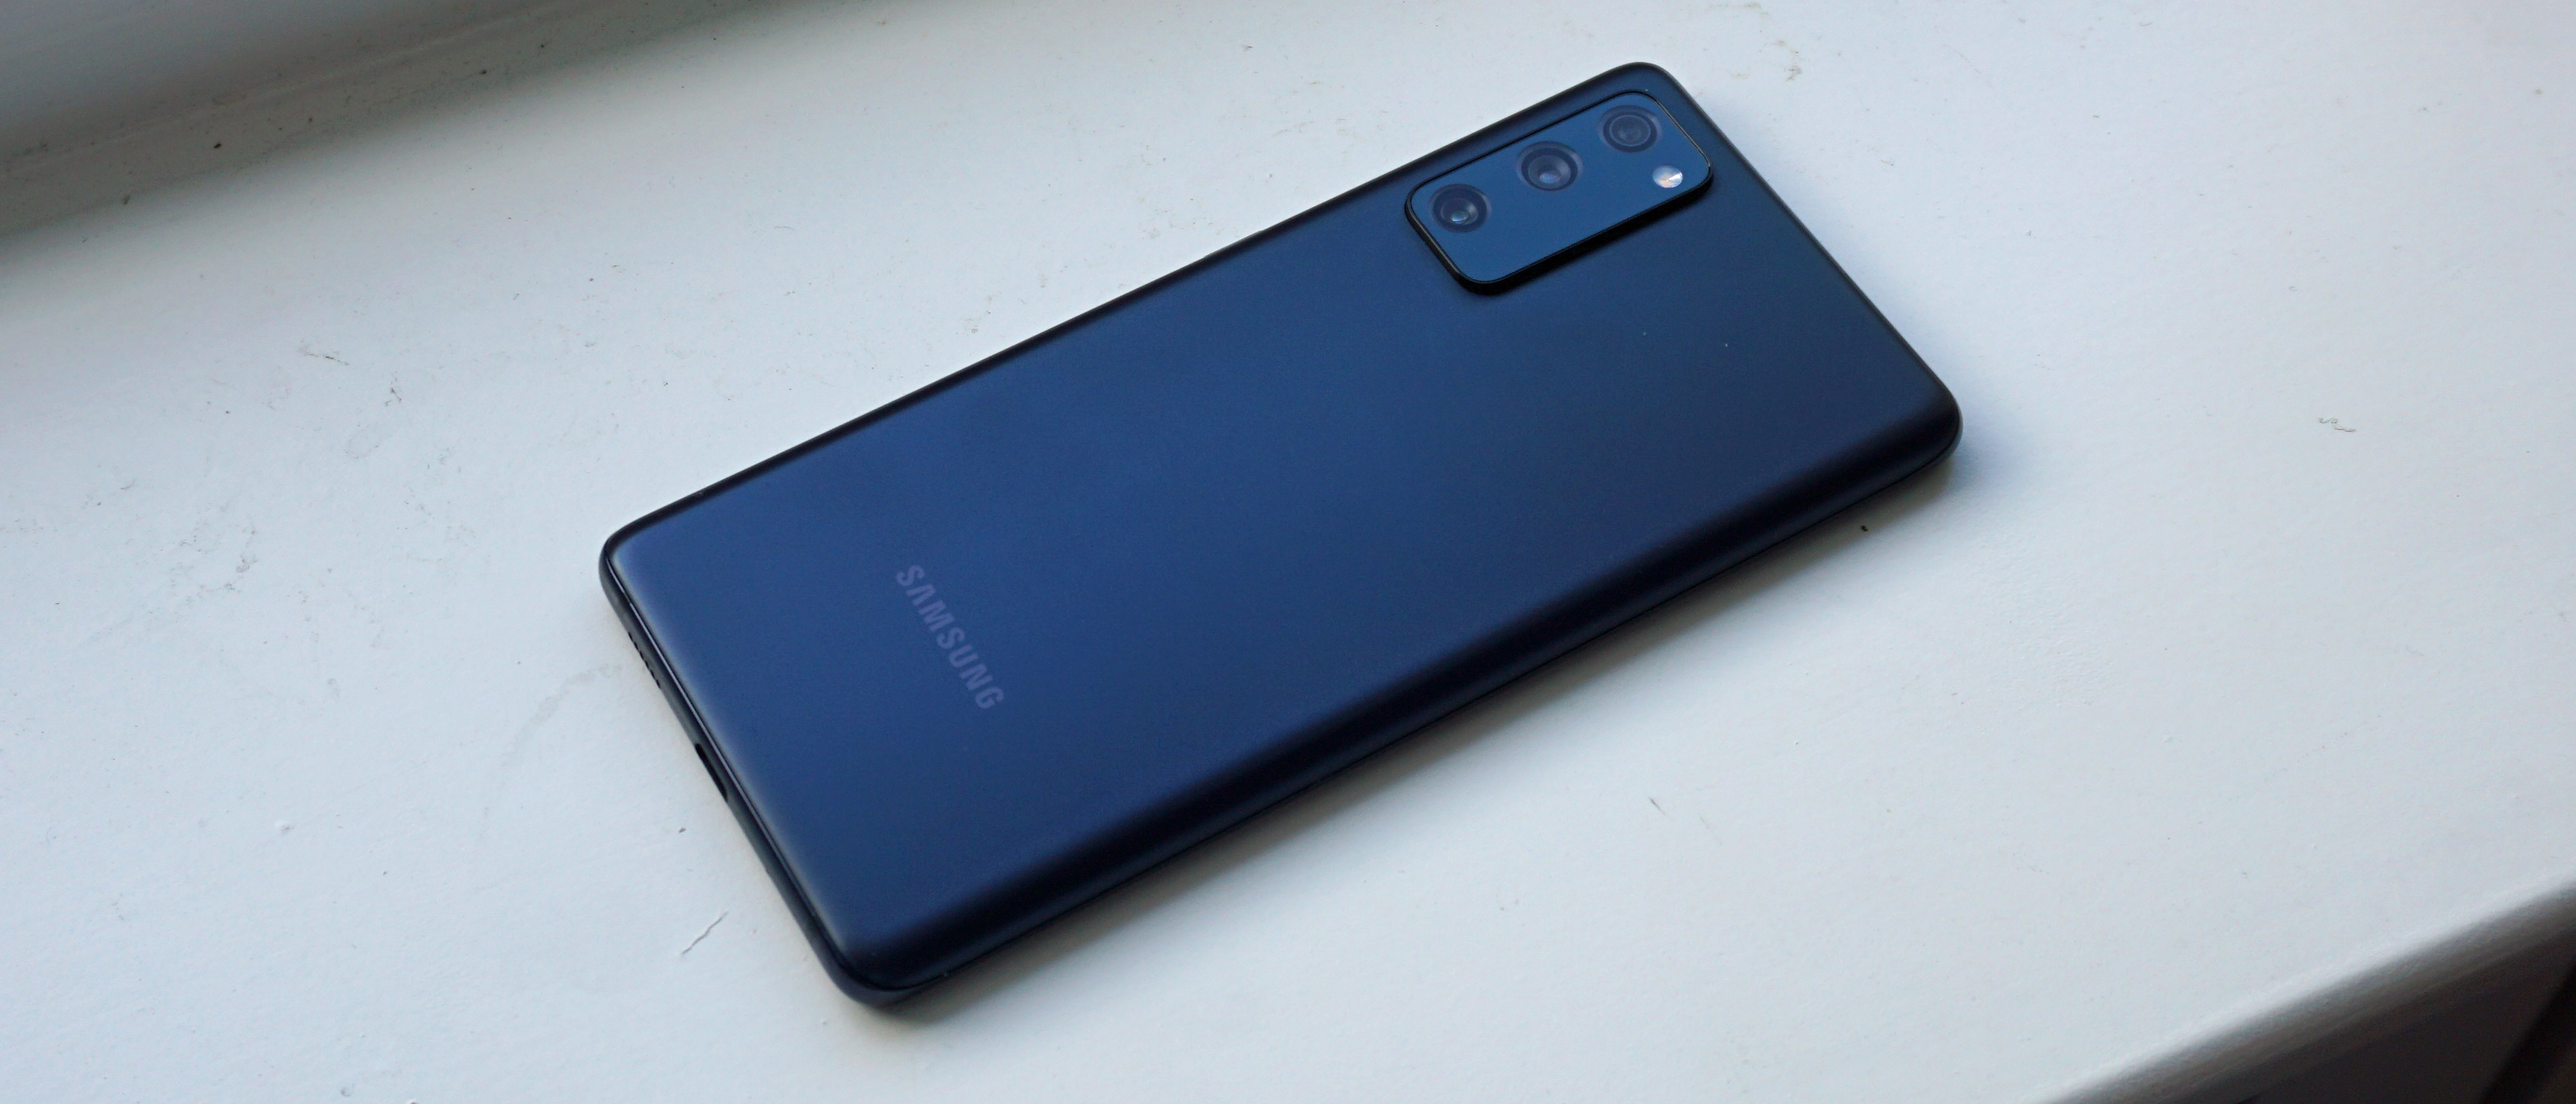 Samsung Galaxy S20 FE 5G Review - Pros and cons, Verdict